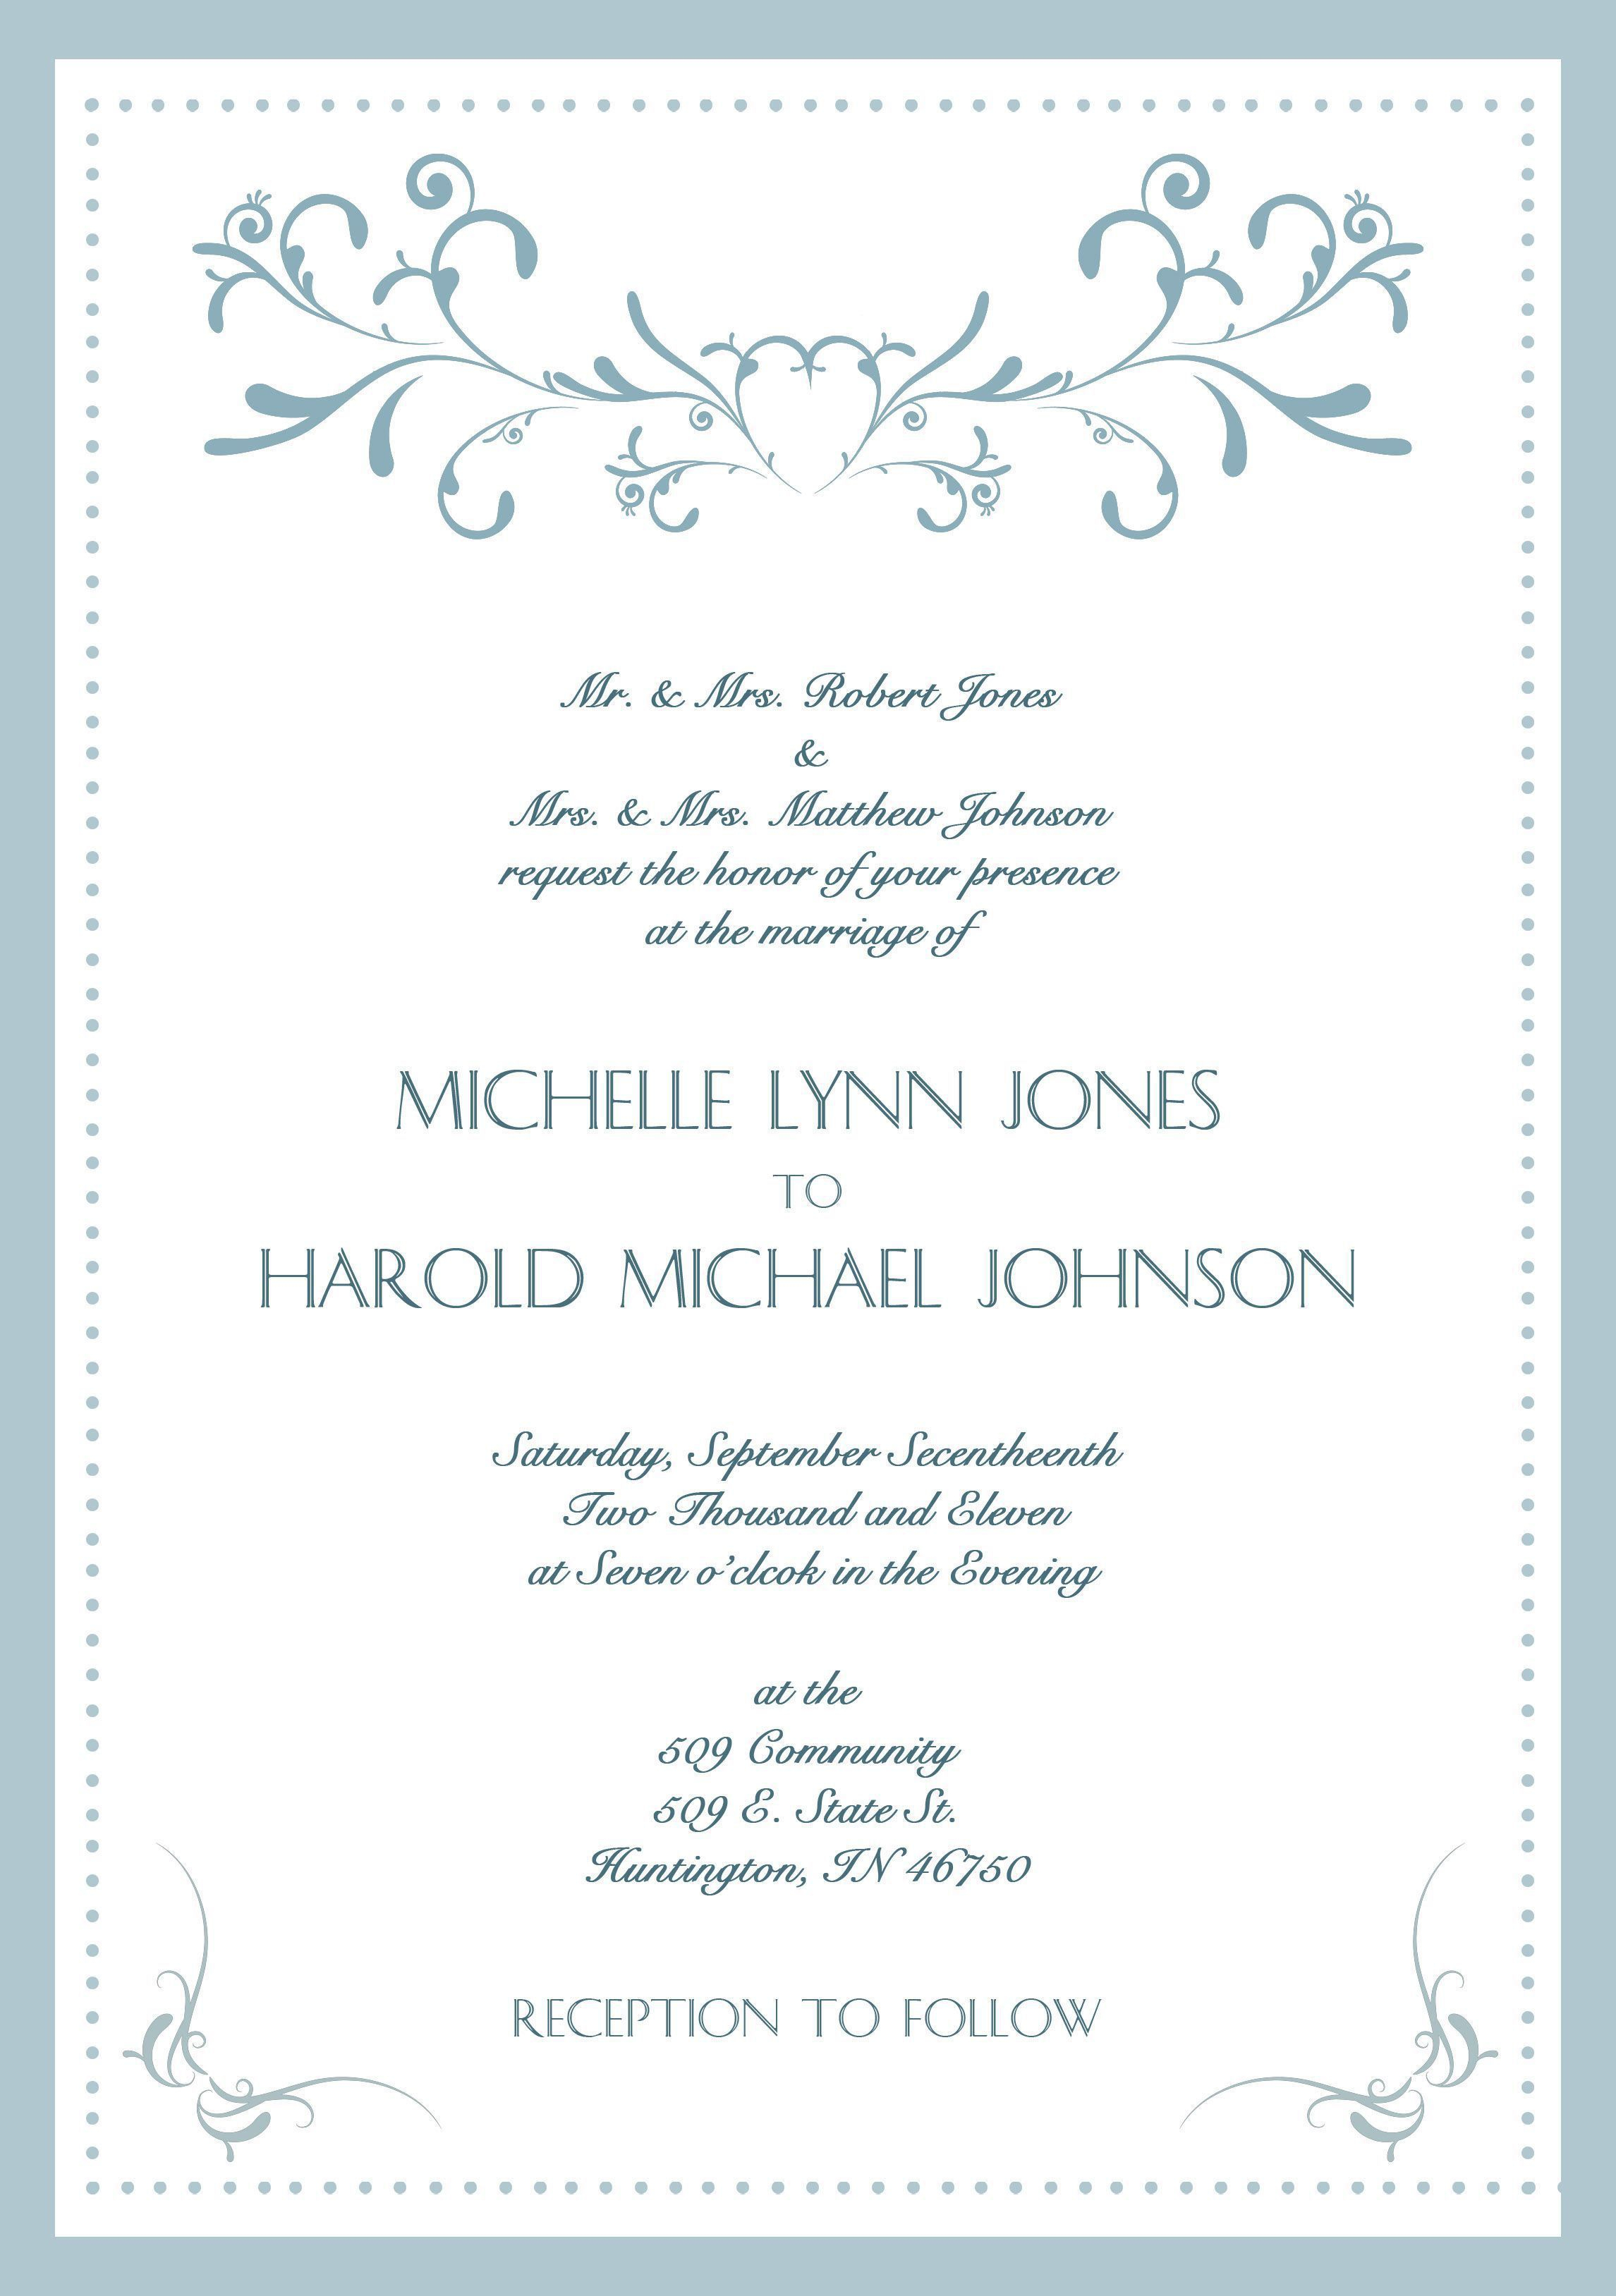 What To Write On A Wedding Invitation Sample Wedding Invitation Cards In English Wedding Invitations In